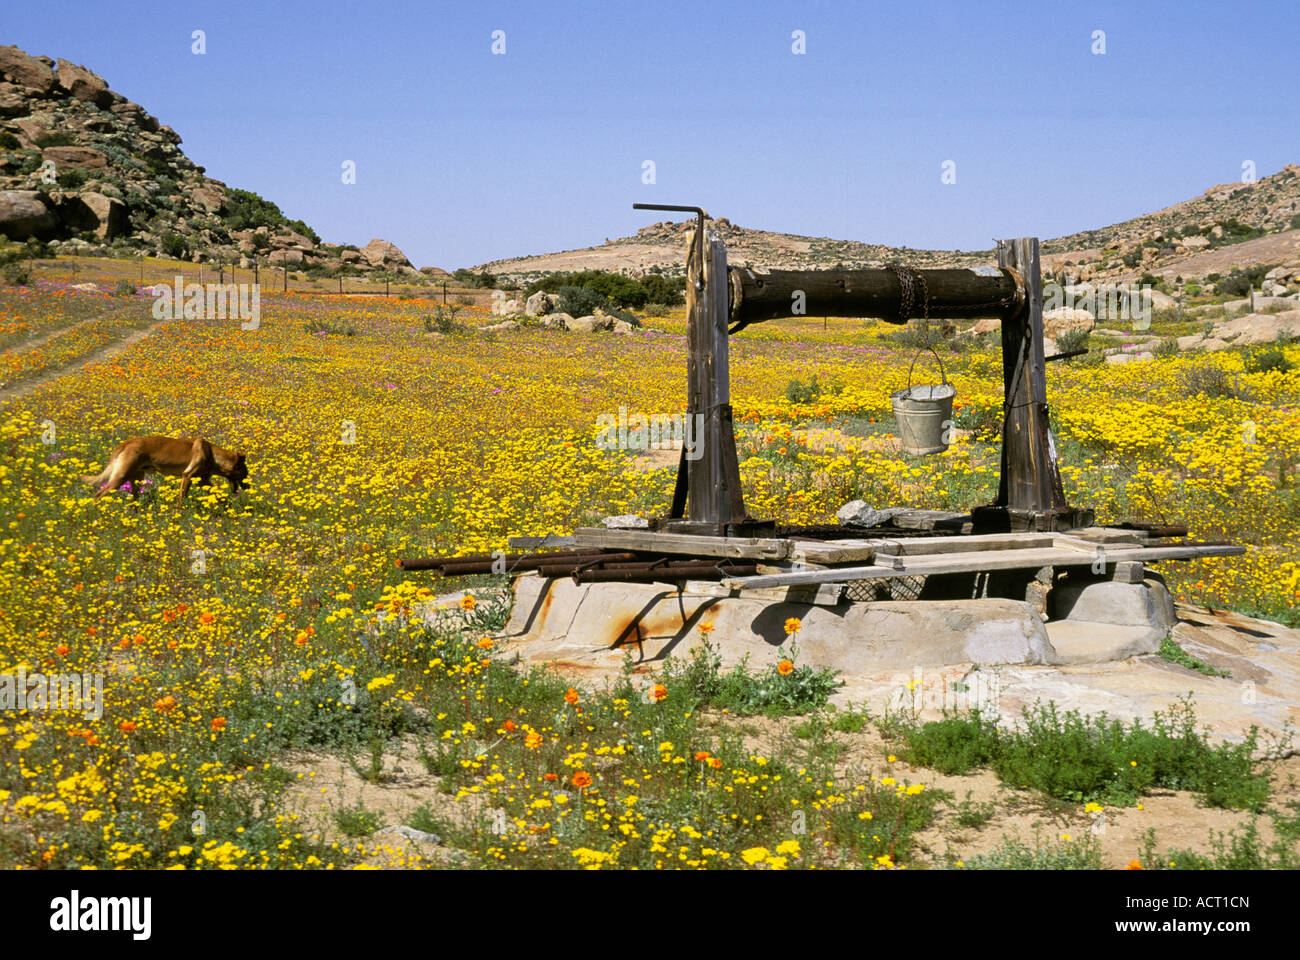 Field of yellow daisies and a dog near an old wooden well near Kamieskroon Namaqualand north western Cape South Africa Stock Photo